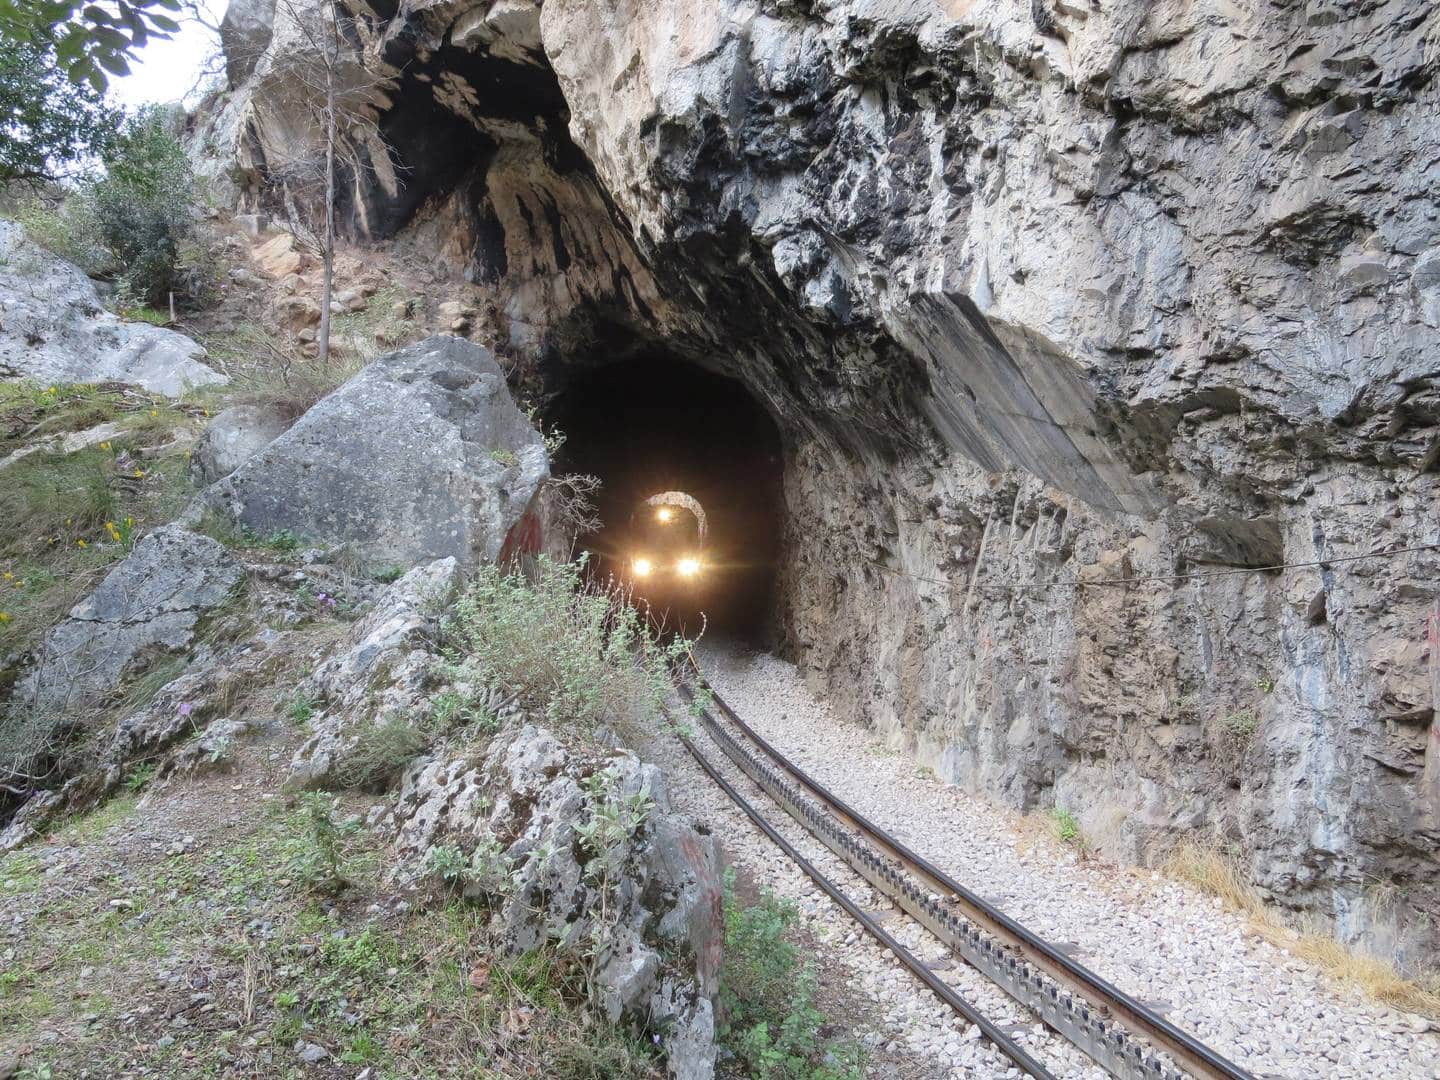 Headlights of Kalavryta train coming out of narrow rocky tunnel on rack and pinion rails